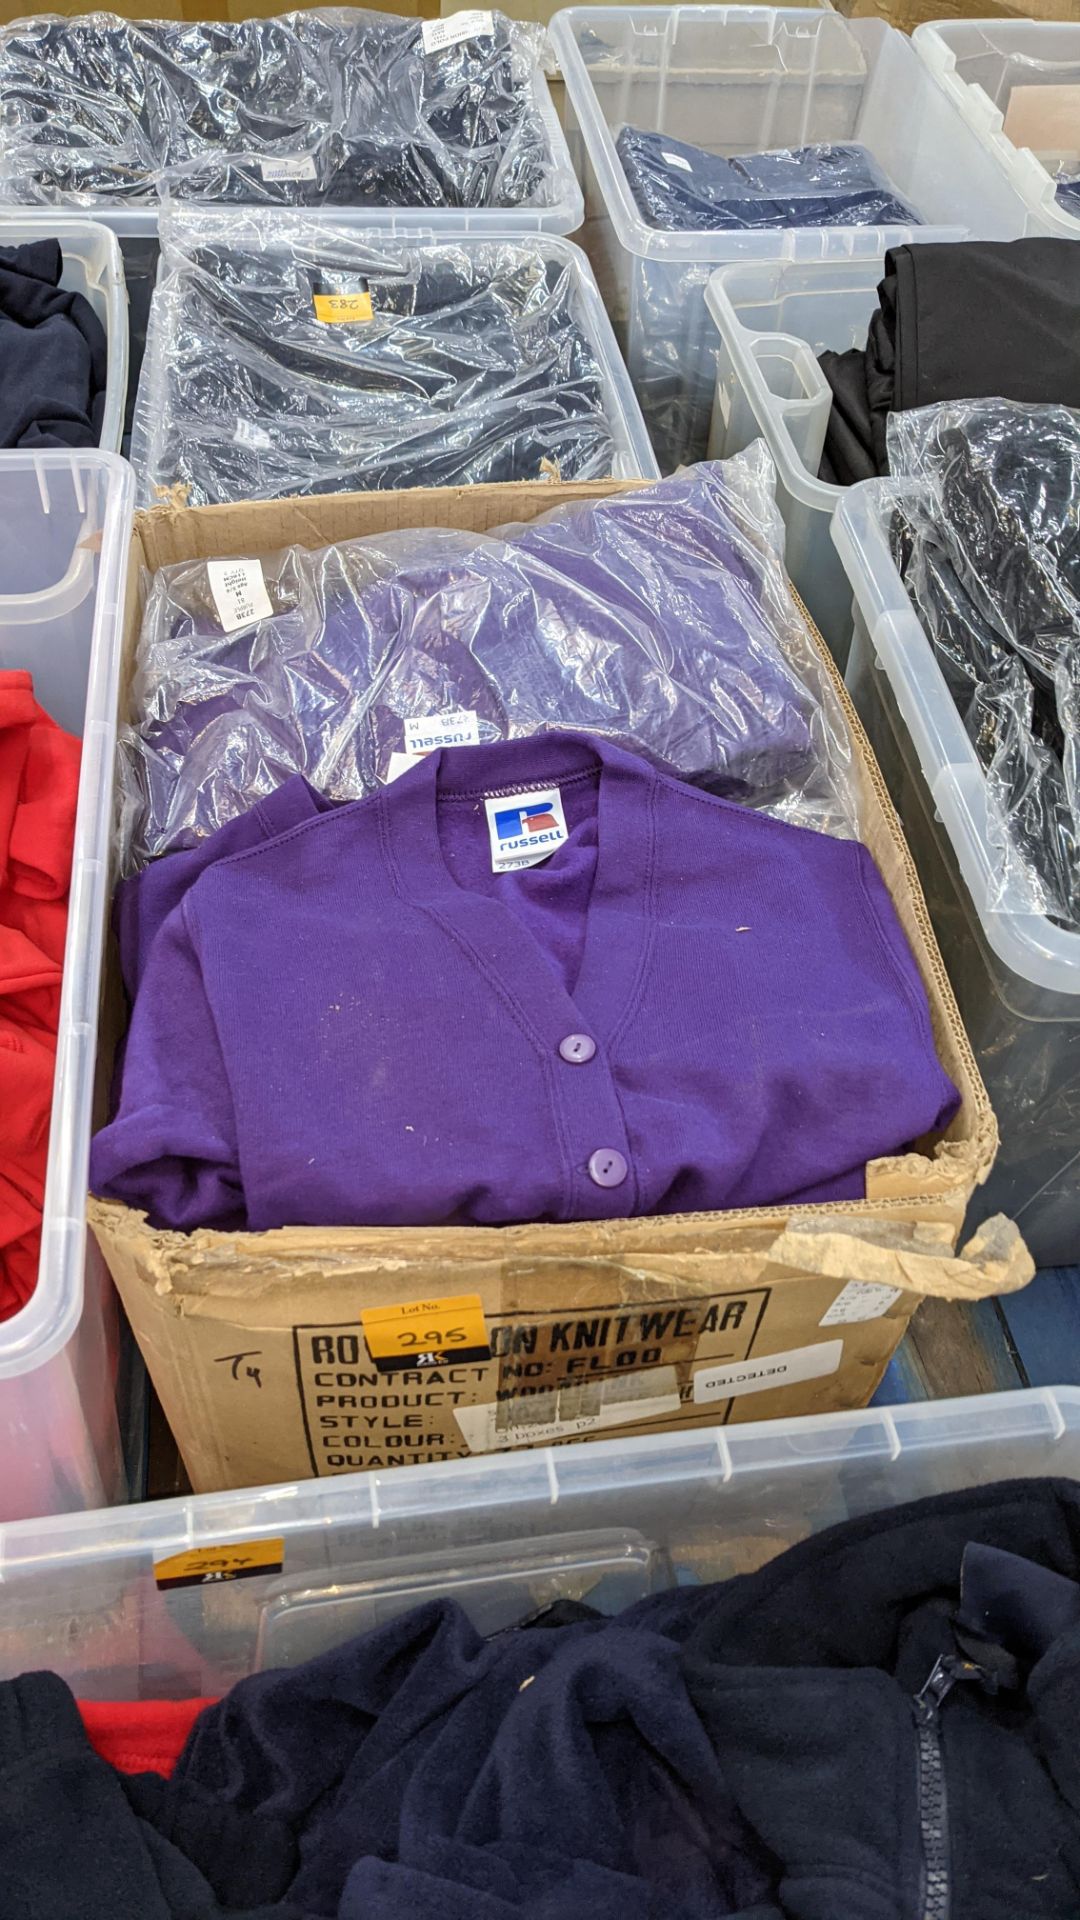 Quantity of Russell children's purple button up sweat tops - 1 large box